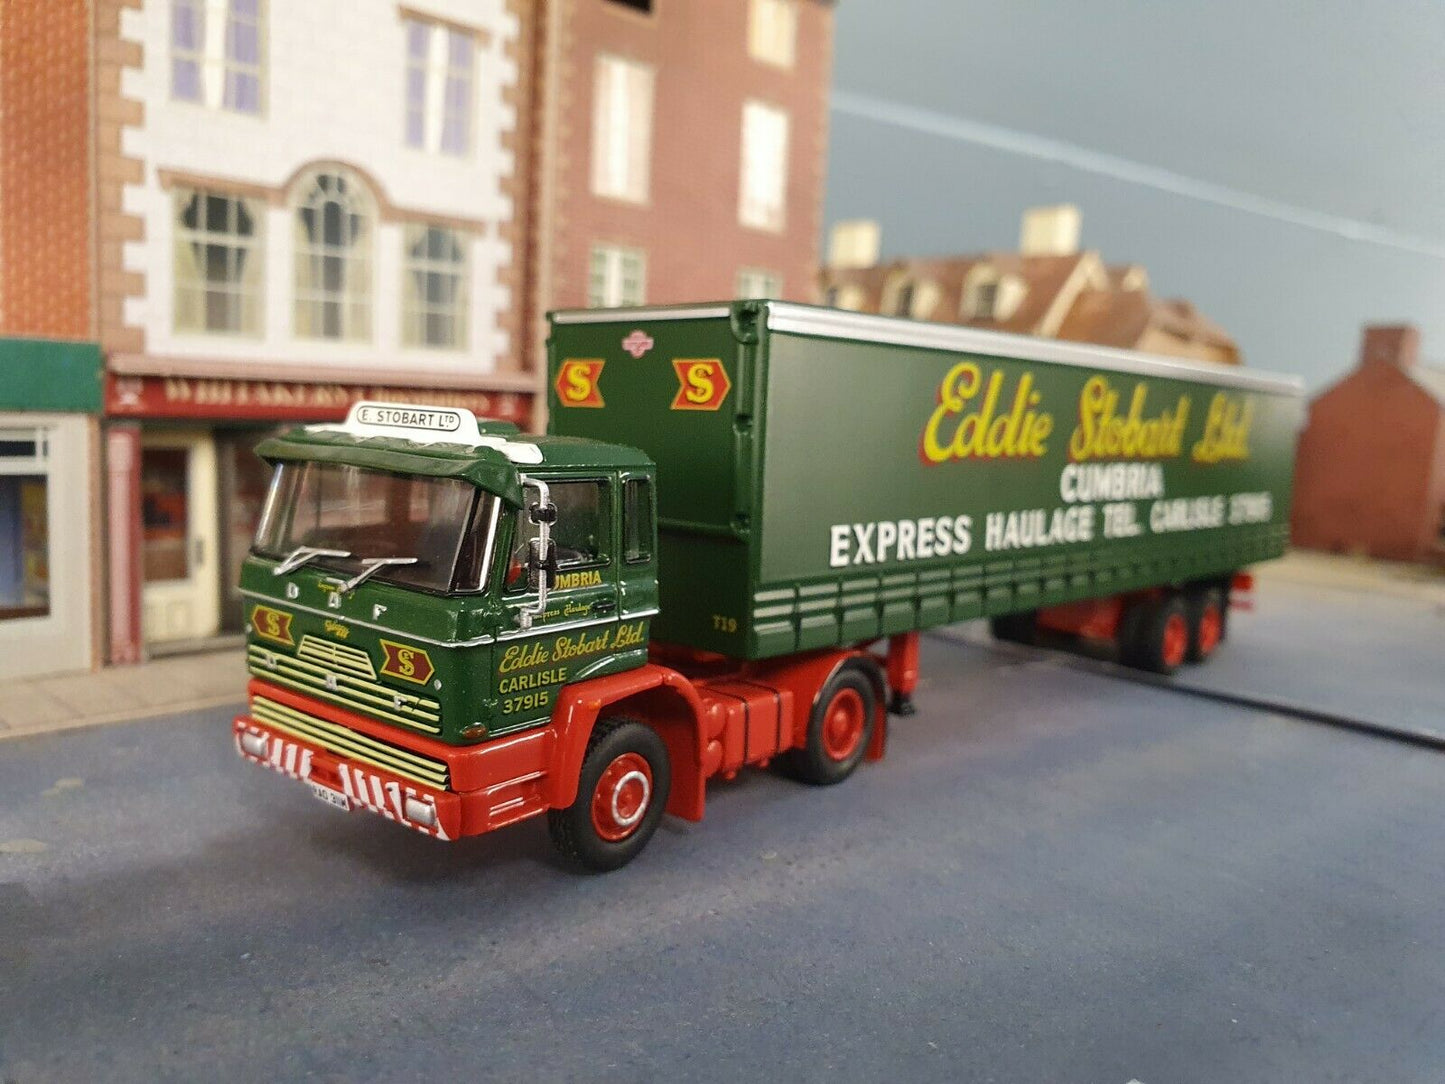 Stobart DAF F2200 Series 1976 Camion et remorque Bachmann Dapol Hornby 1:76 OO/00